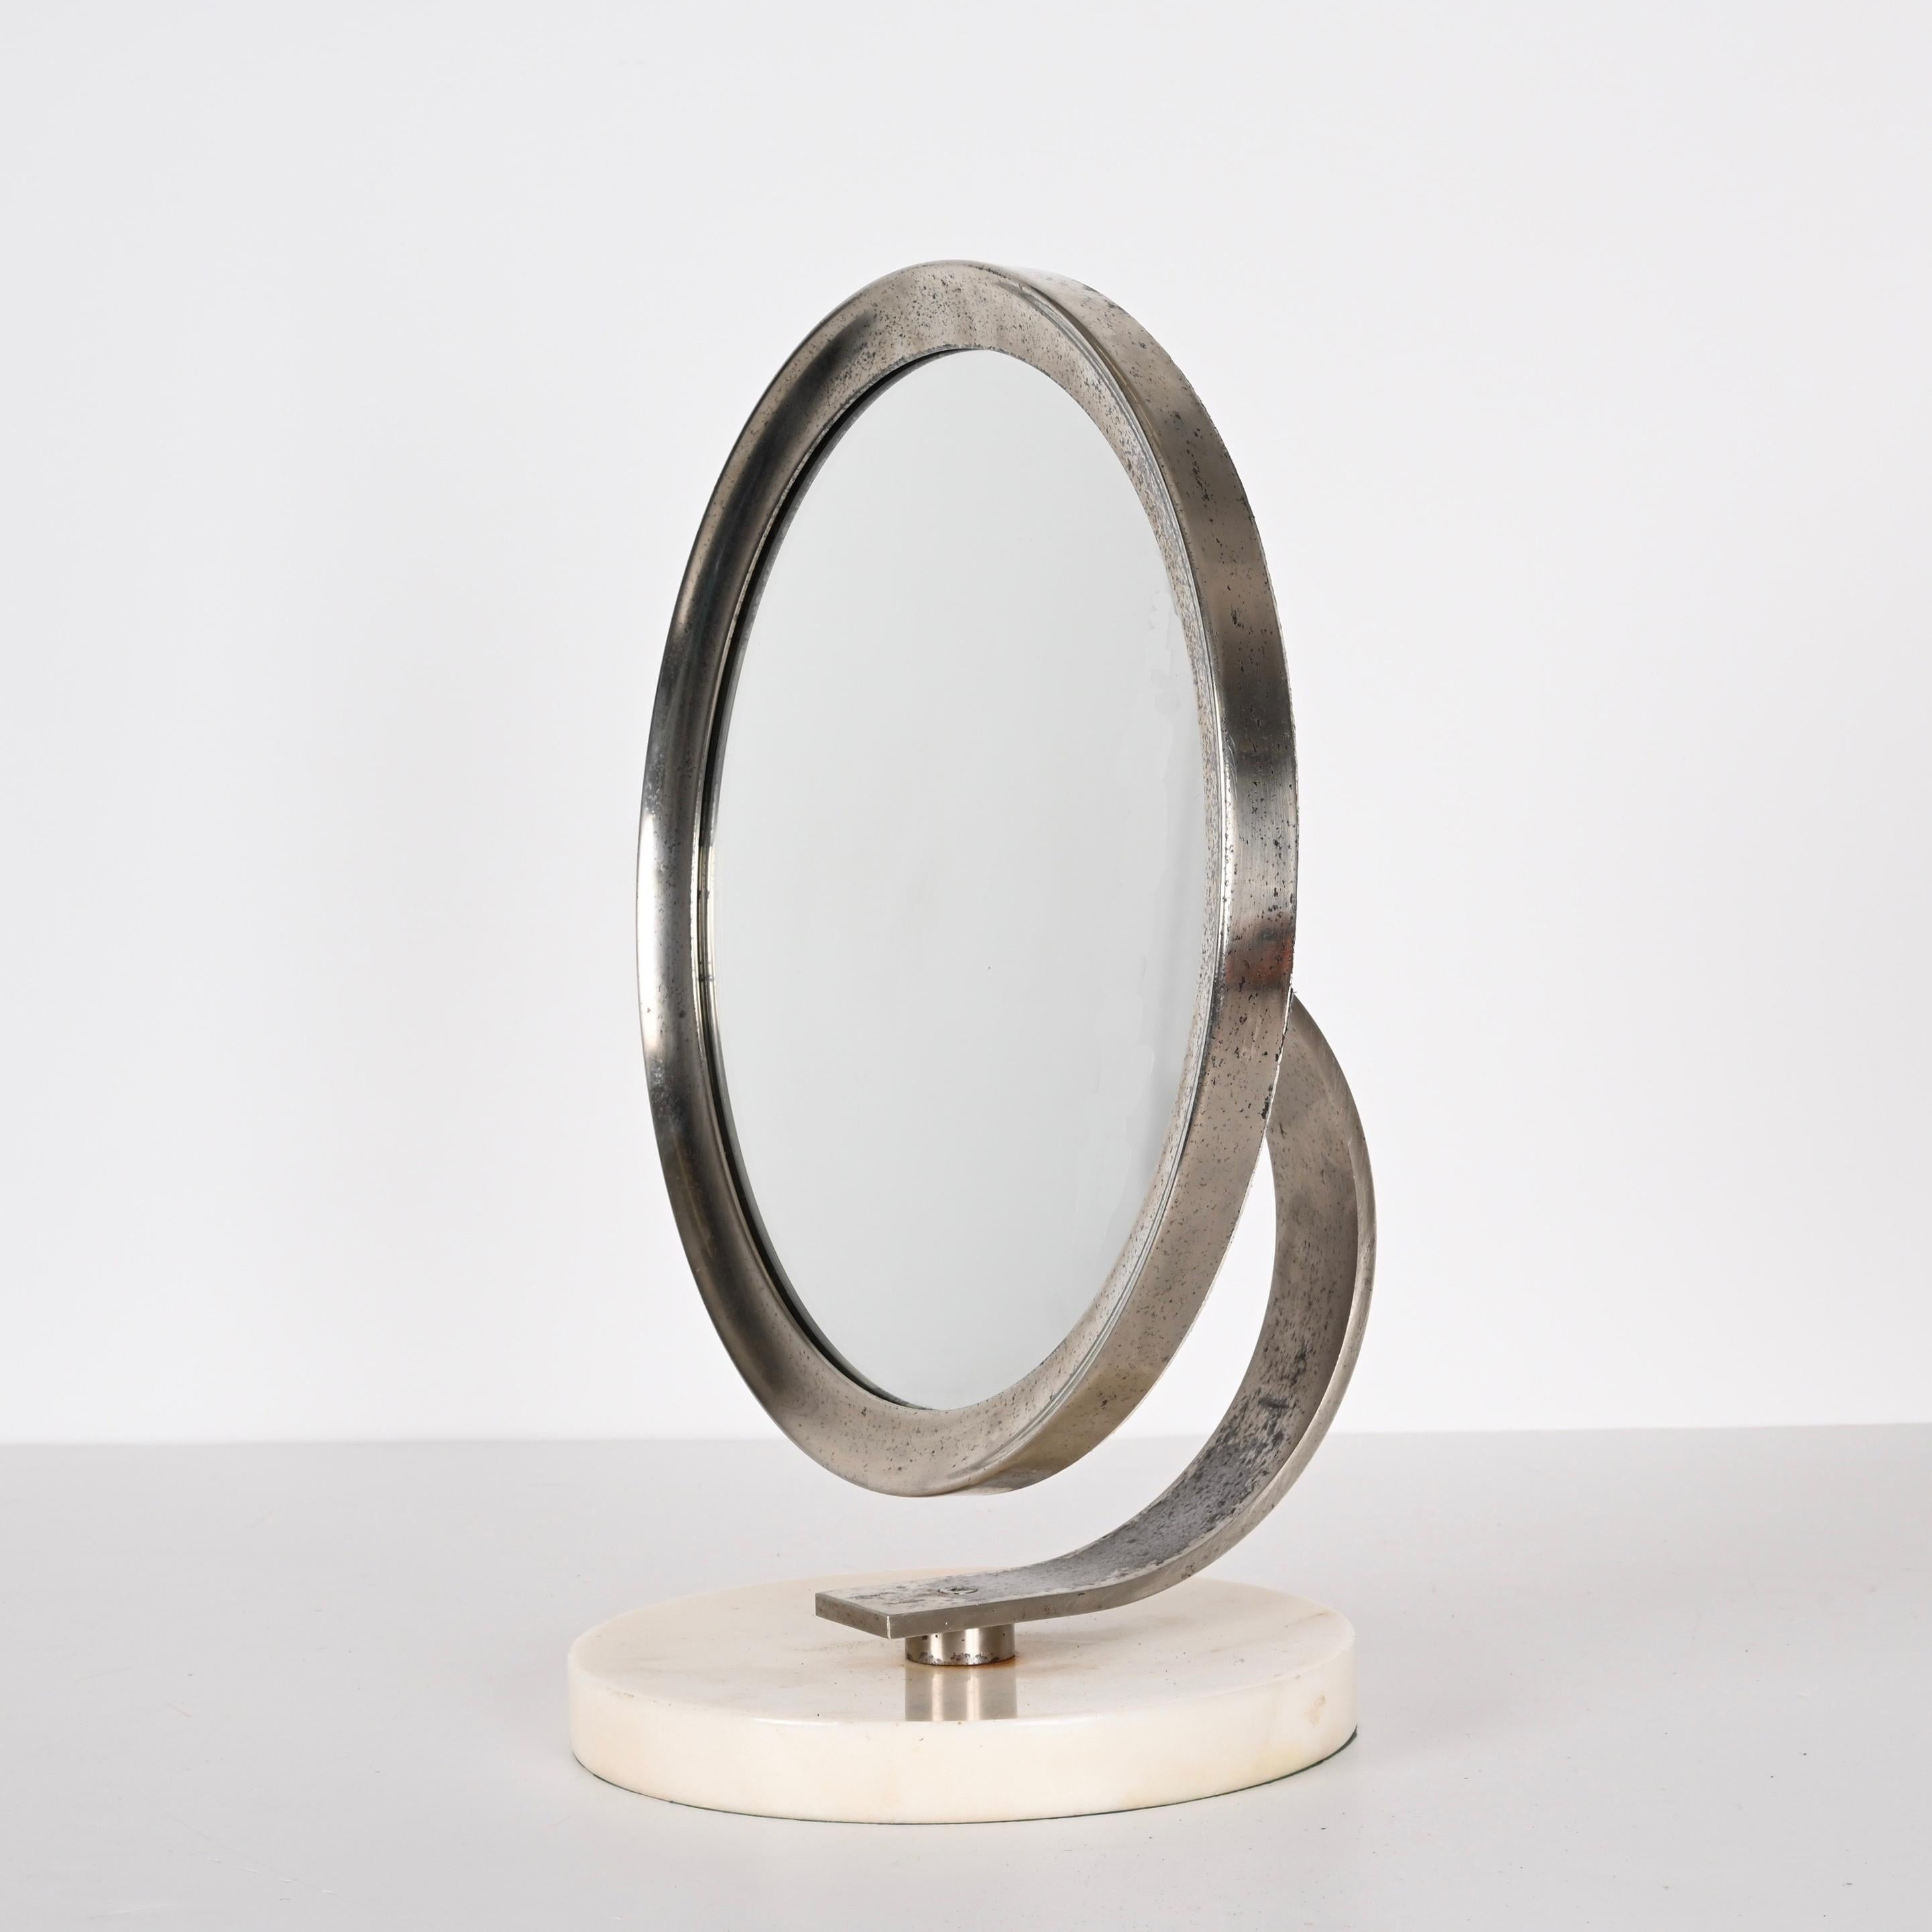 Midcentury Round White Carrara Marble and Steel Italian Dressing Mirror, 1960s For Sale 10